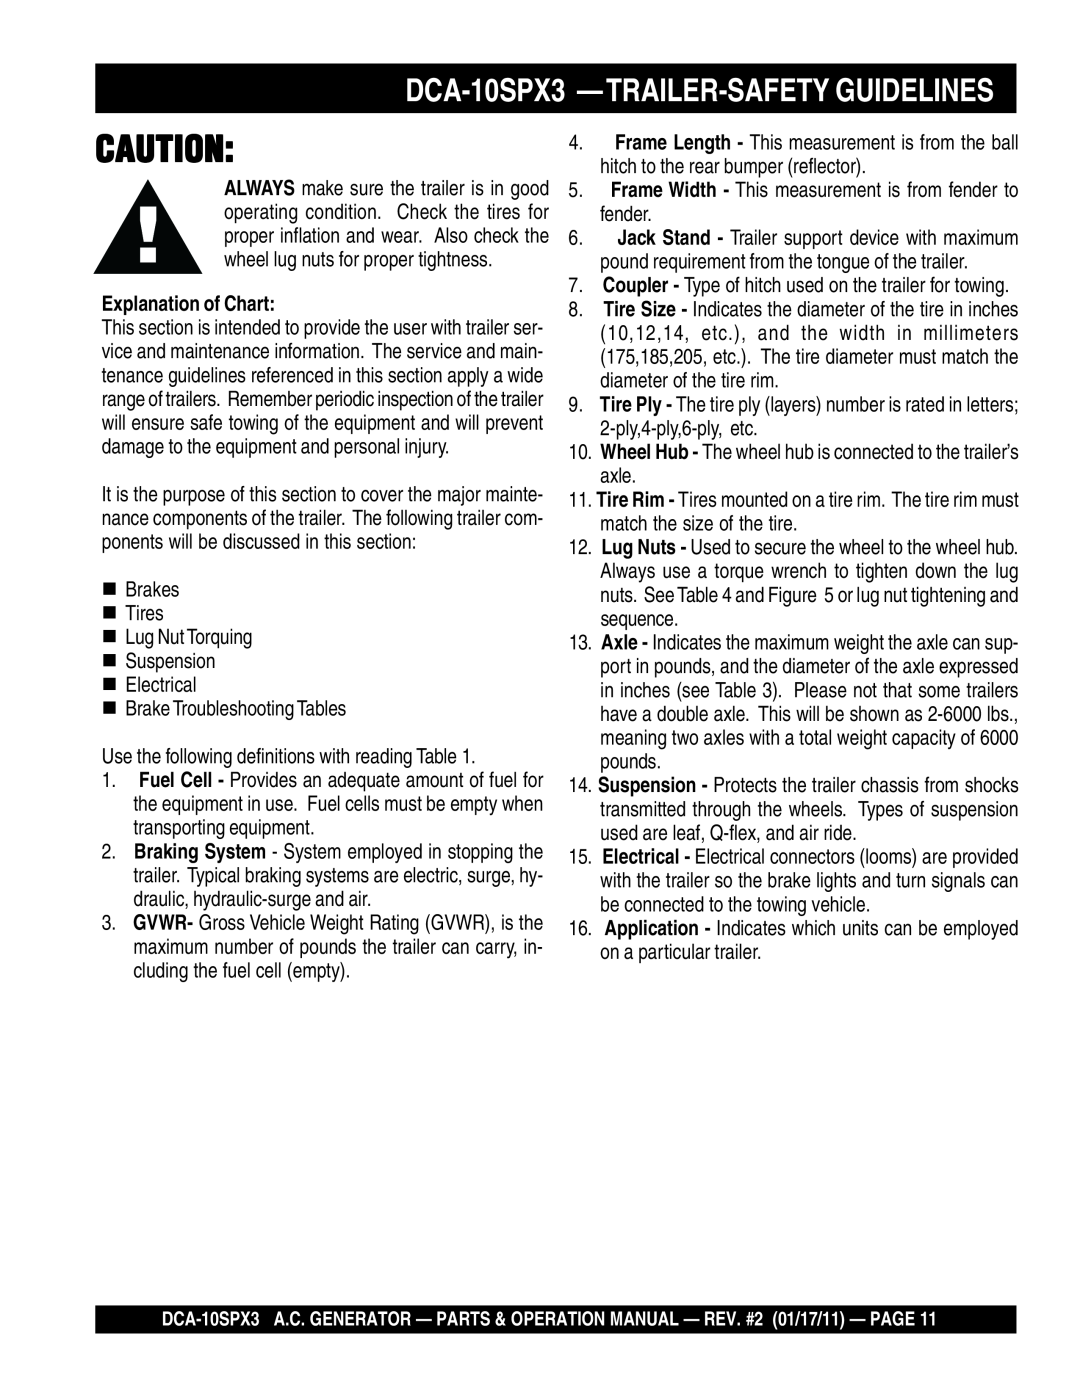 Multiquip DCA10SPX3 manual DCA-10SPX3 -TRAILER-SAFETY GUIDELINES, Explanation of Chart 